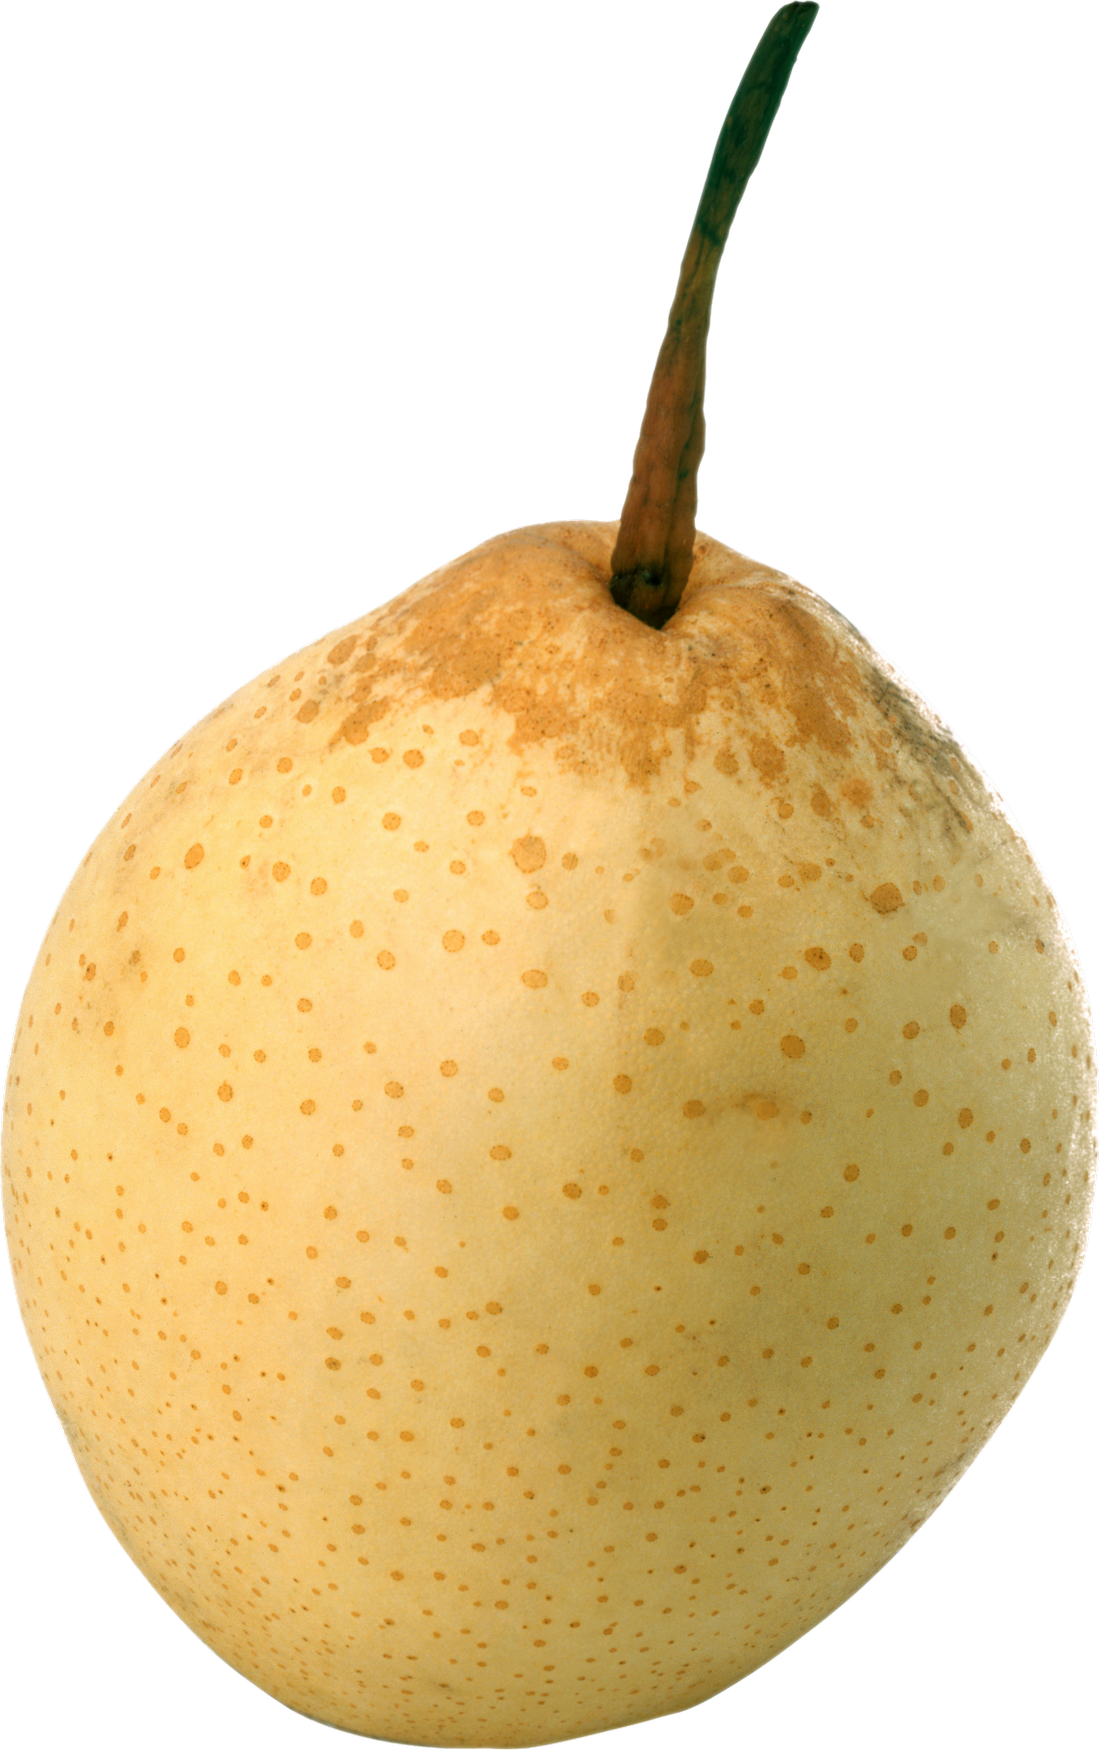 Pear PNG Image